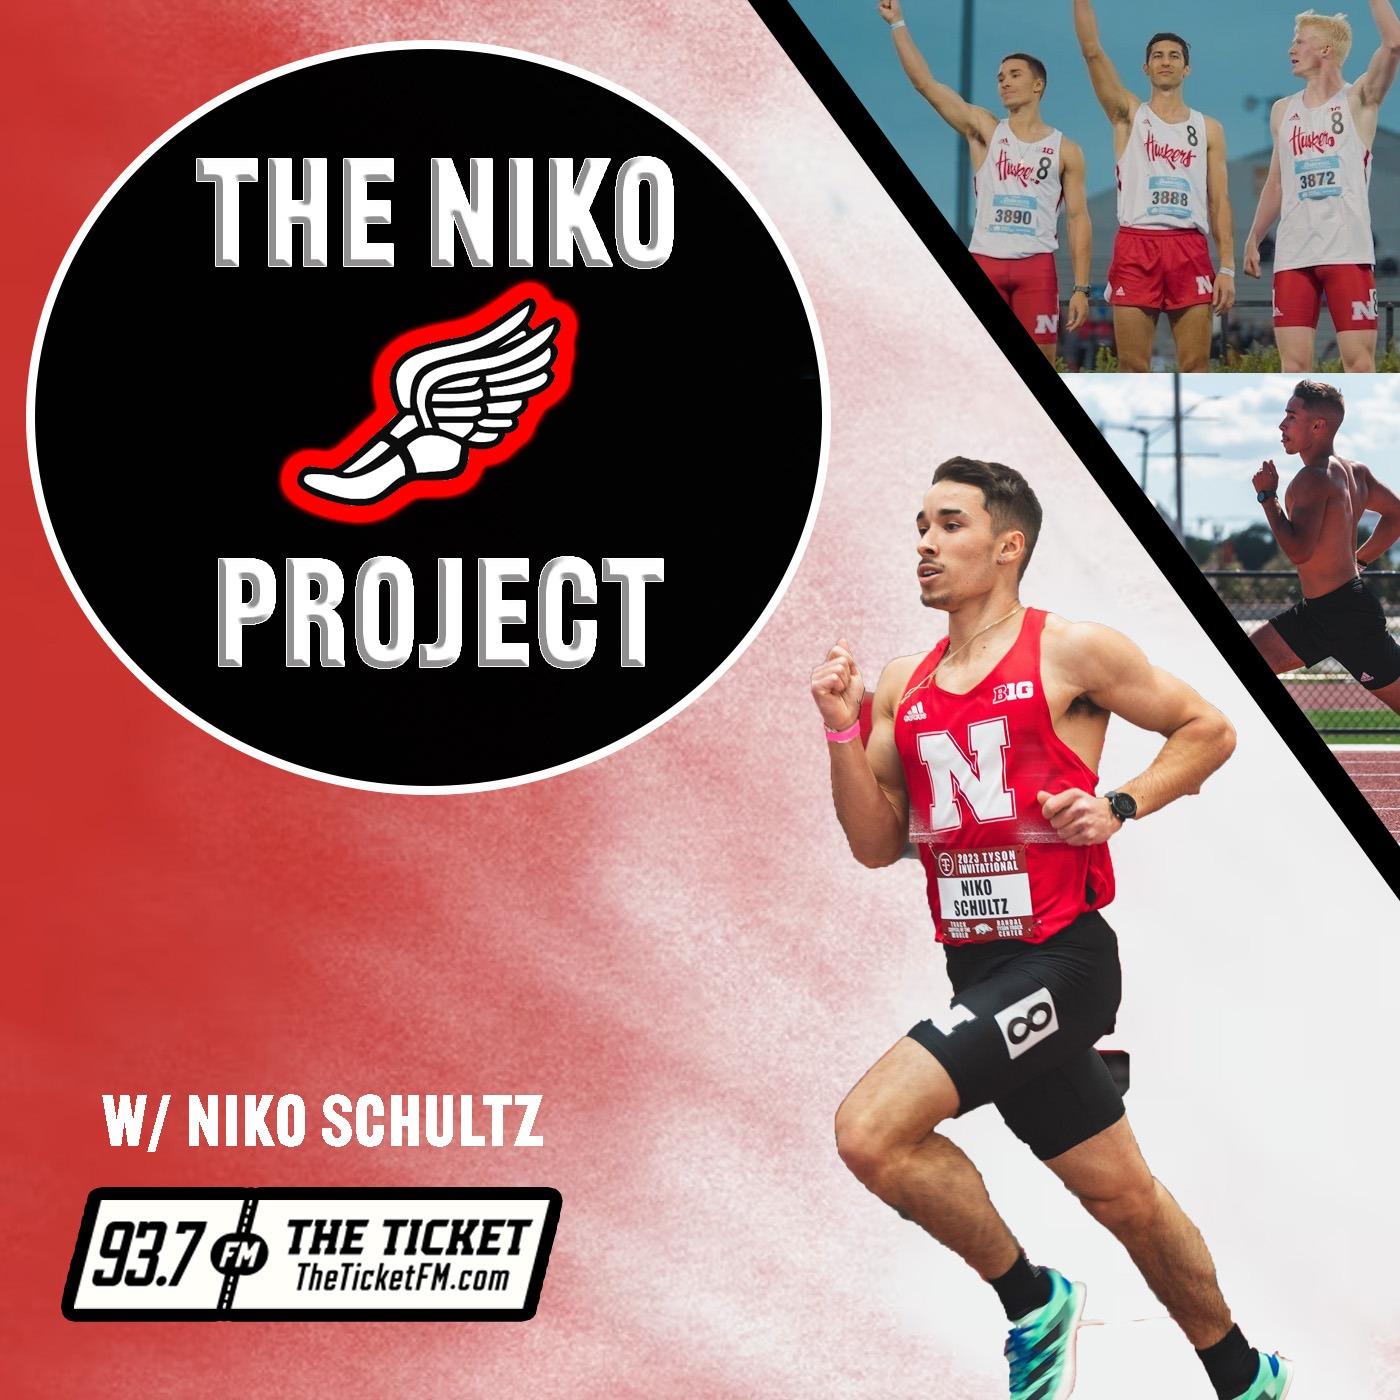 The Niko Project - 93.7 The Ticket KNTK